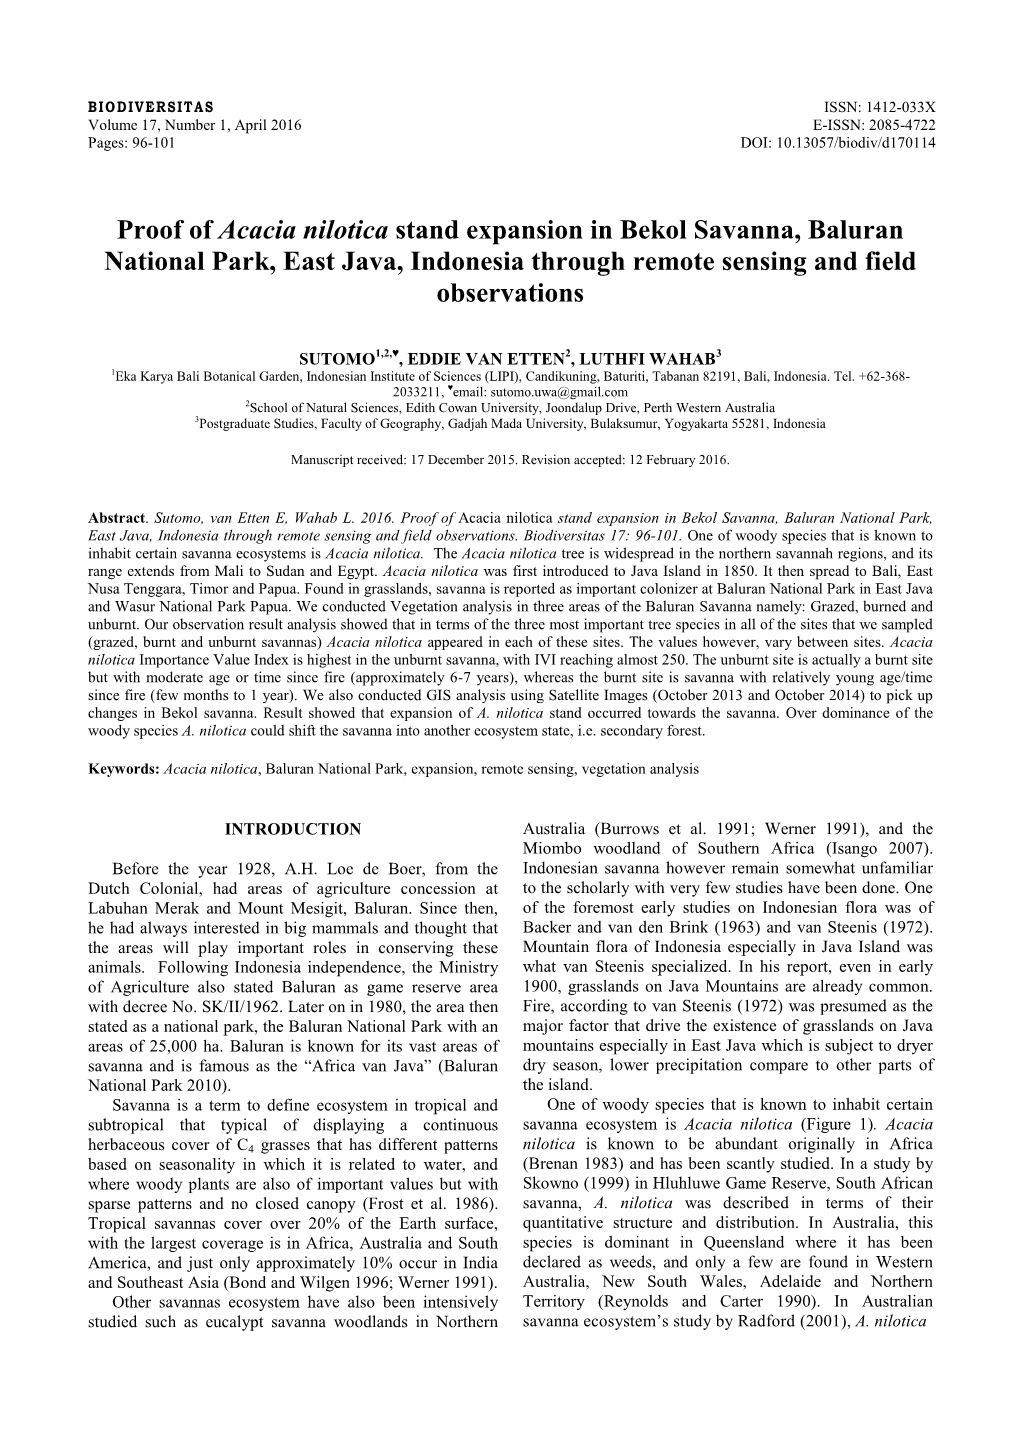 Proof of Acacia Nilotica Stand Expansion in Bekol Savanna, Baluran National Park, East Java, Indonesia Through Remote Sensing and Field Observations